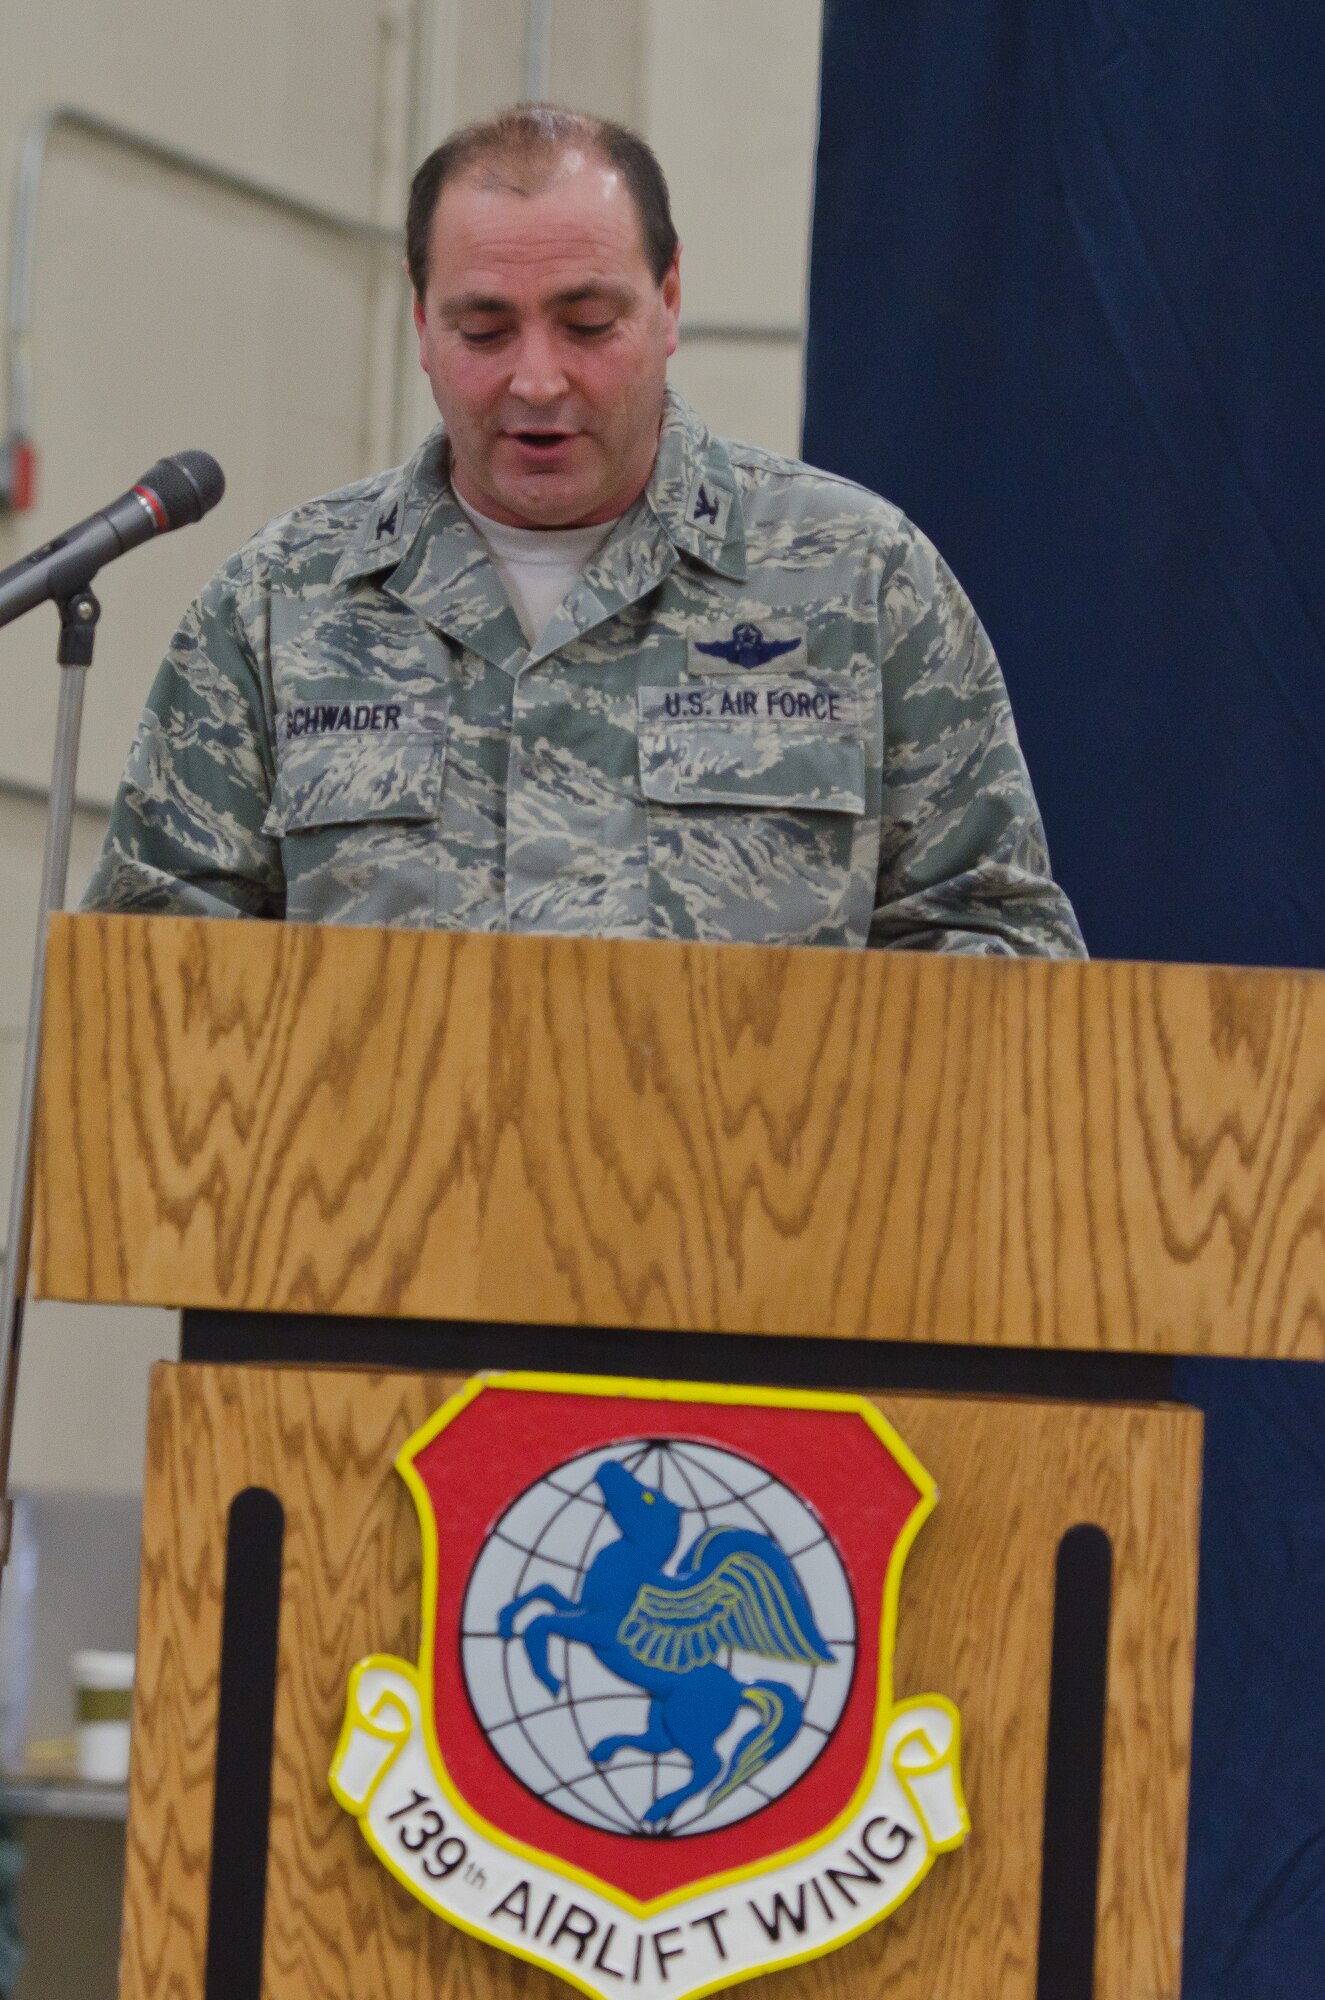 Col. Ralph Schwader, 139th Airlift Wing commander, speaks to members of the Wing after receiving command of the Wing on Jan. 5, 2014 at Rosecrans Air National Guard Base, St. Joseph, Mo.  (U.S. Air  National Guard photo by Senior Airman Sheldon Thompson)